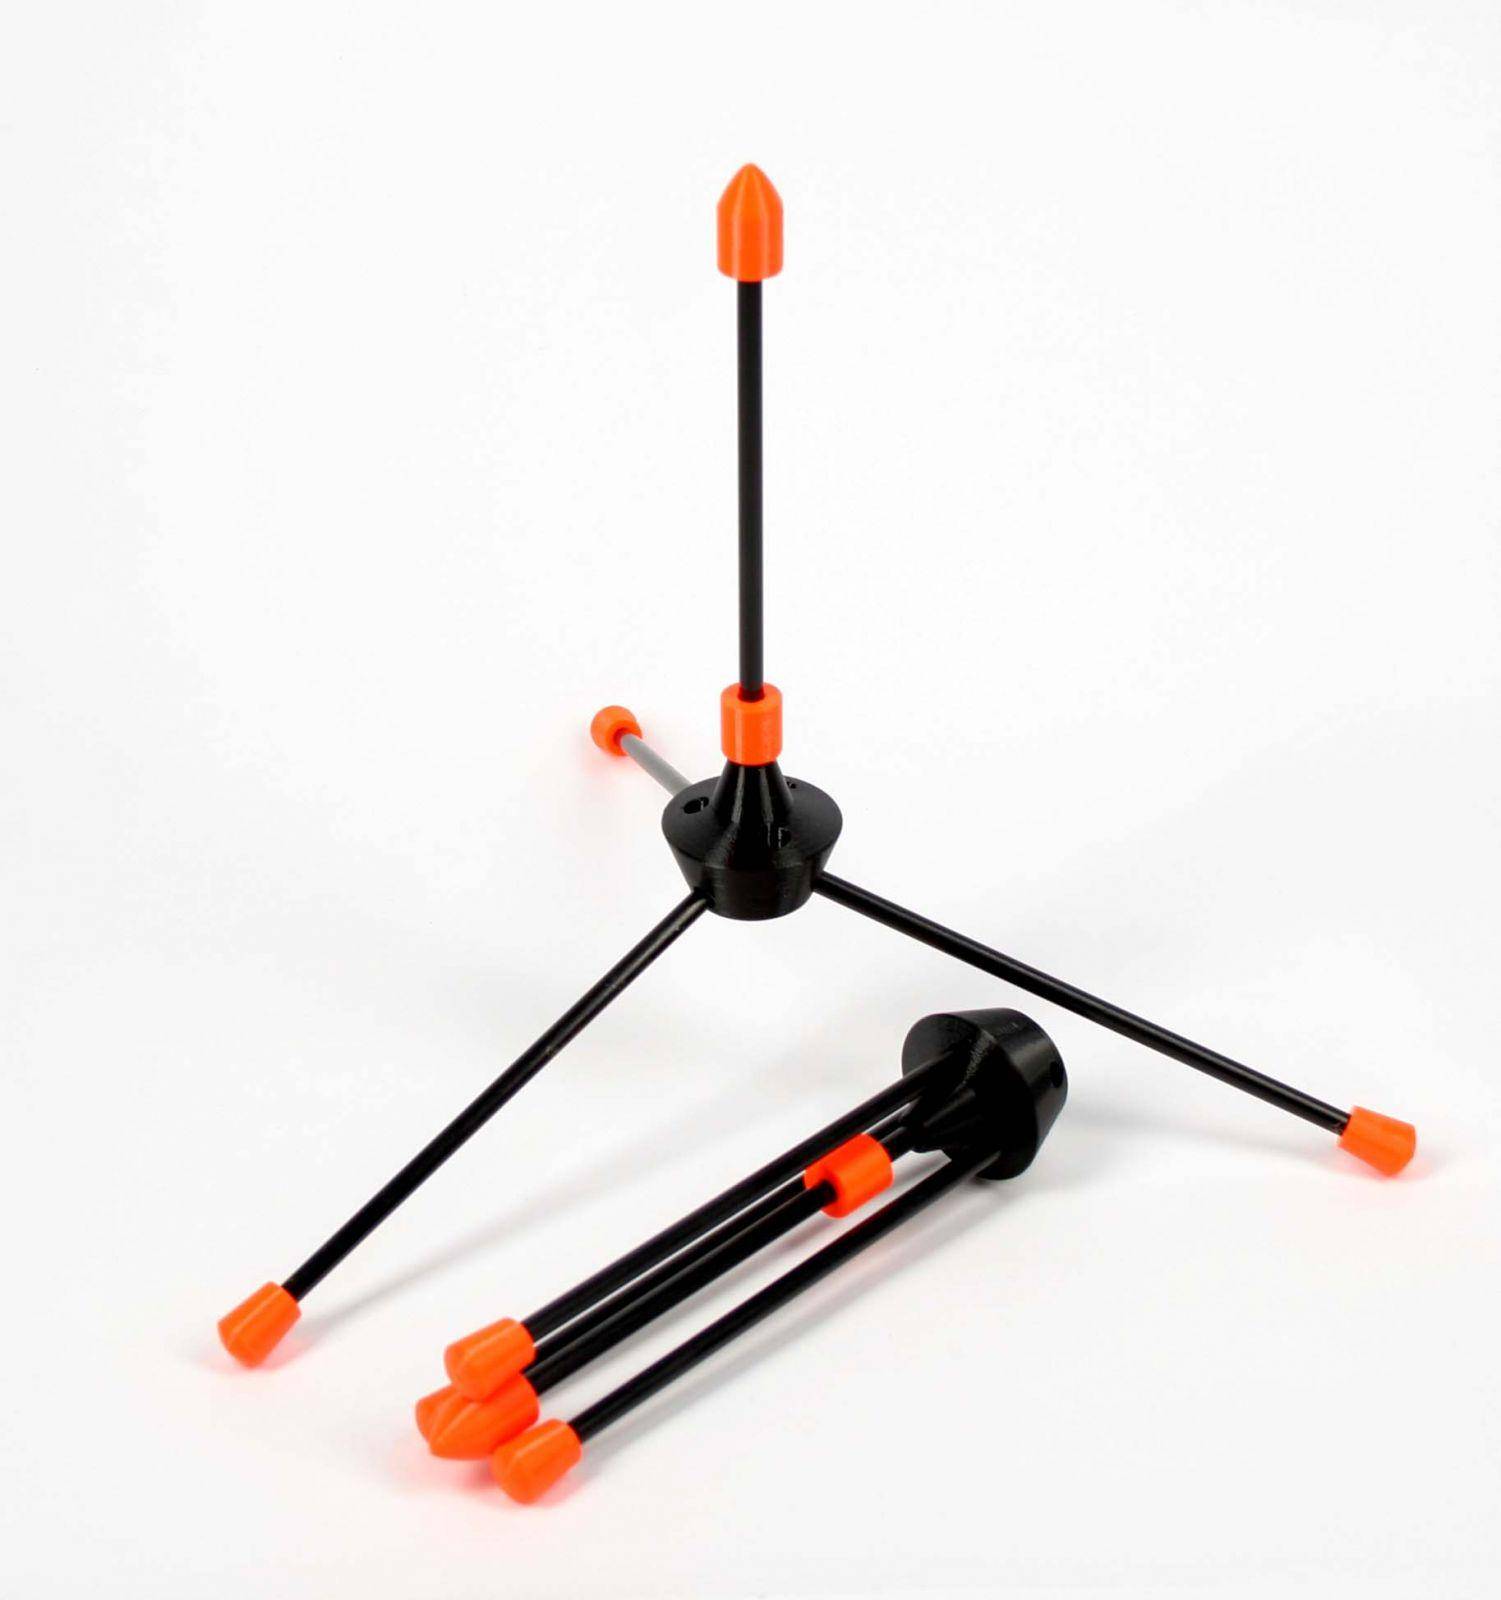 Simple folding stand for your blowpipe